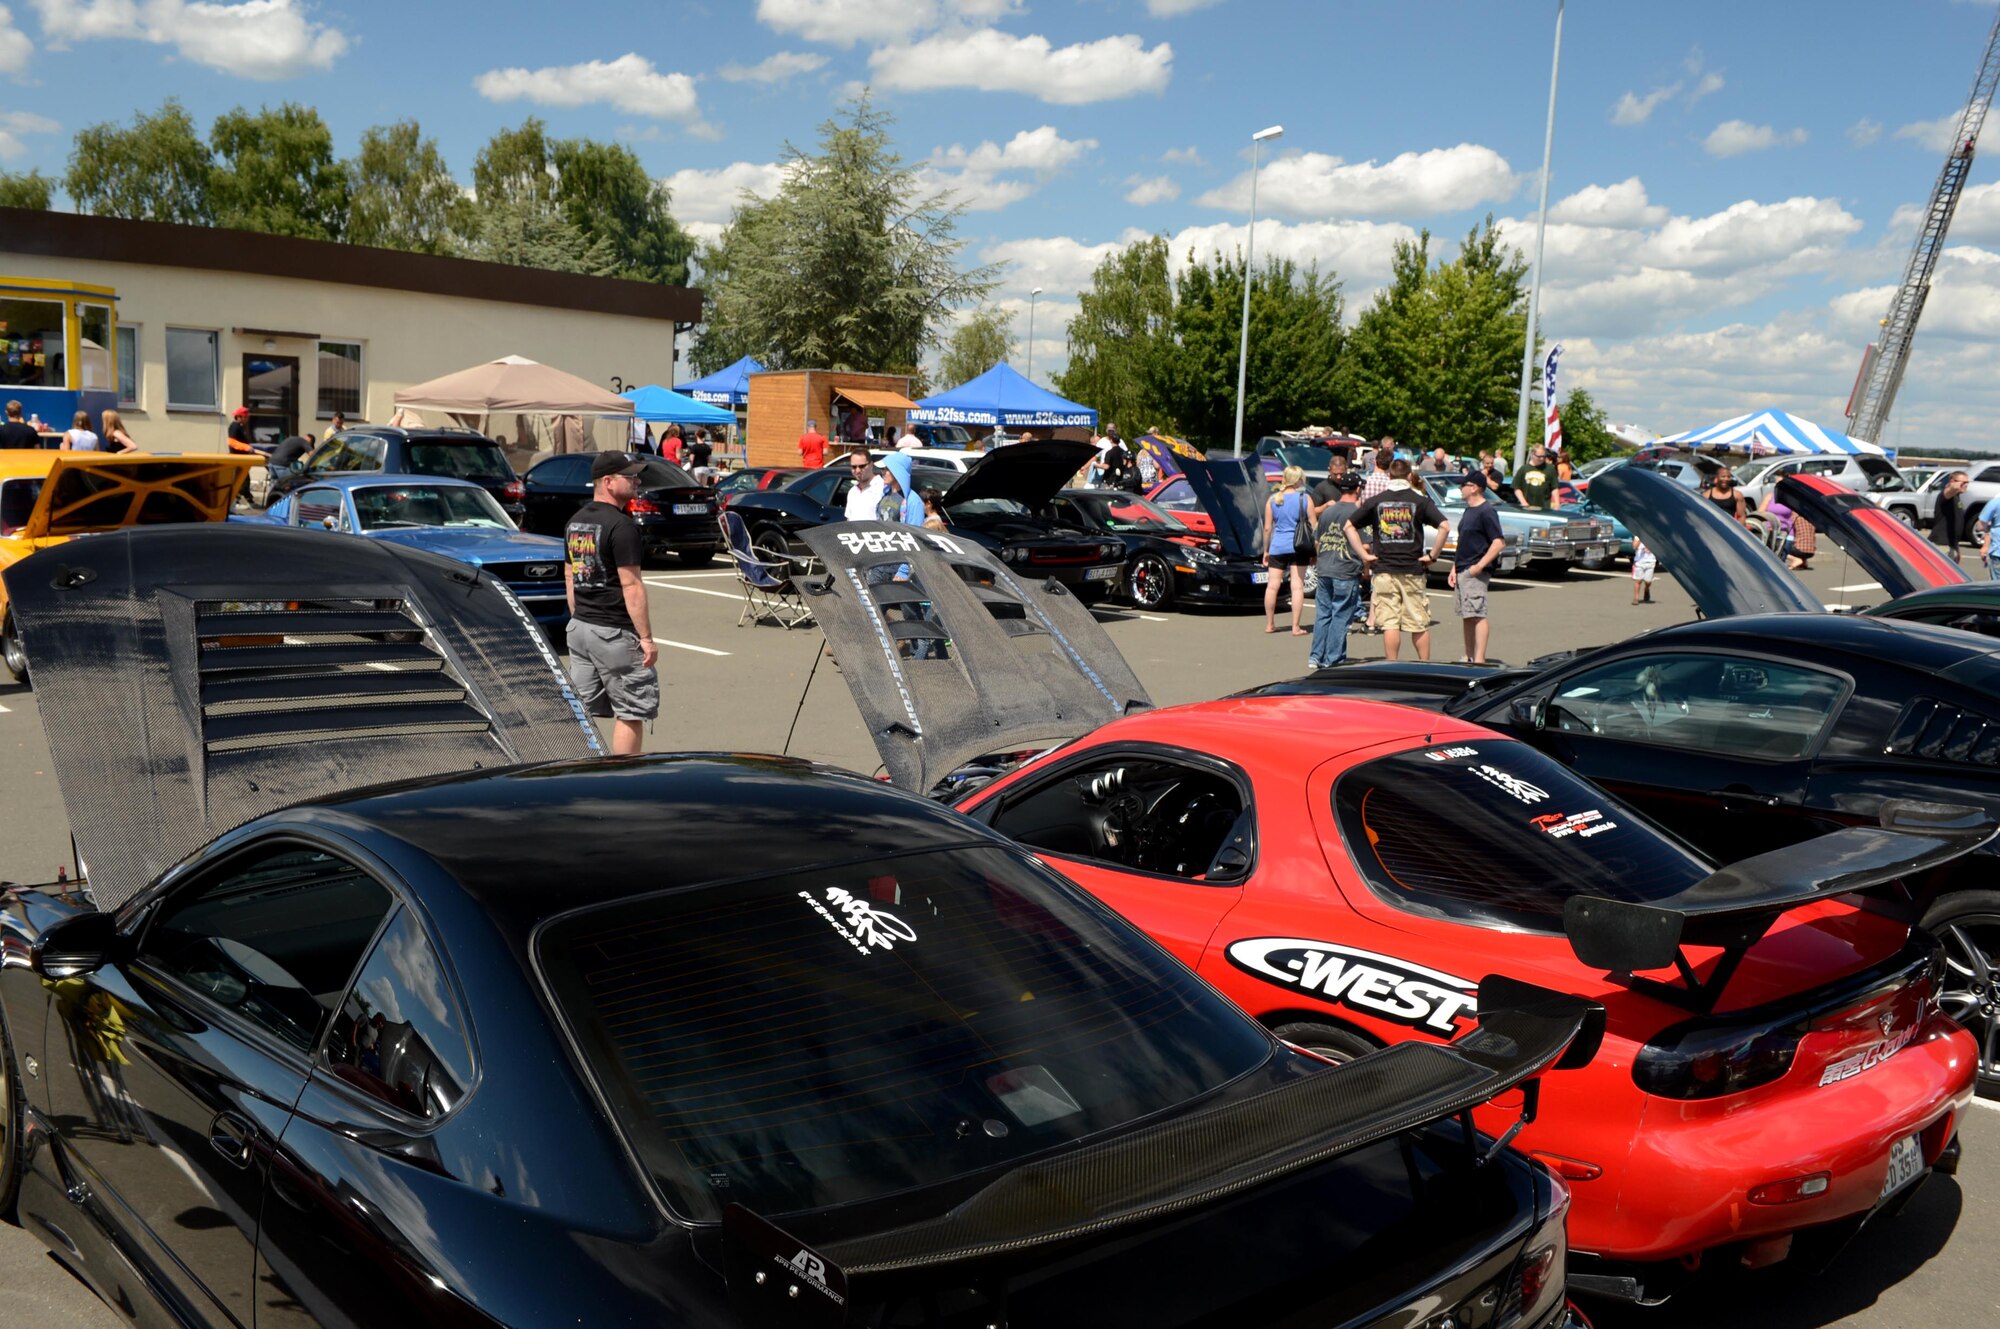 SPANGDAHLEM AIR BASE, Germany – Cars are displayed in a parking lot at the base pavilion in the 12th annual Motor Weekend car competition Aug. 4, 2013. More than 240 cars were registered to compete in three categories of cars, trucks and motorcycles. (U.S. Air Force photo by Airman 1st Class Kyle Gese/Released) 